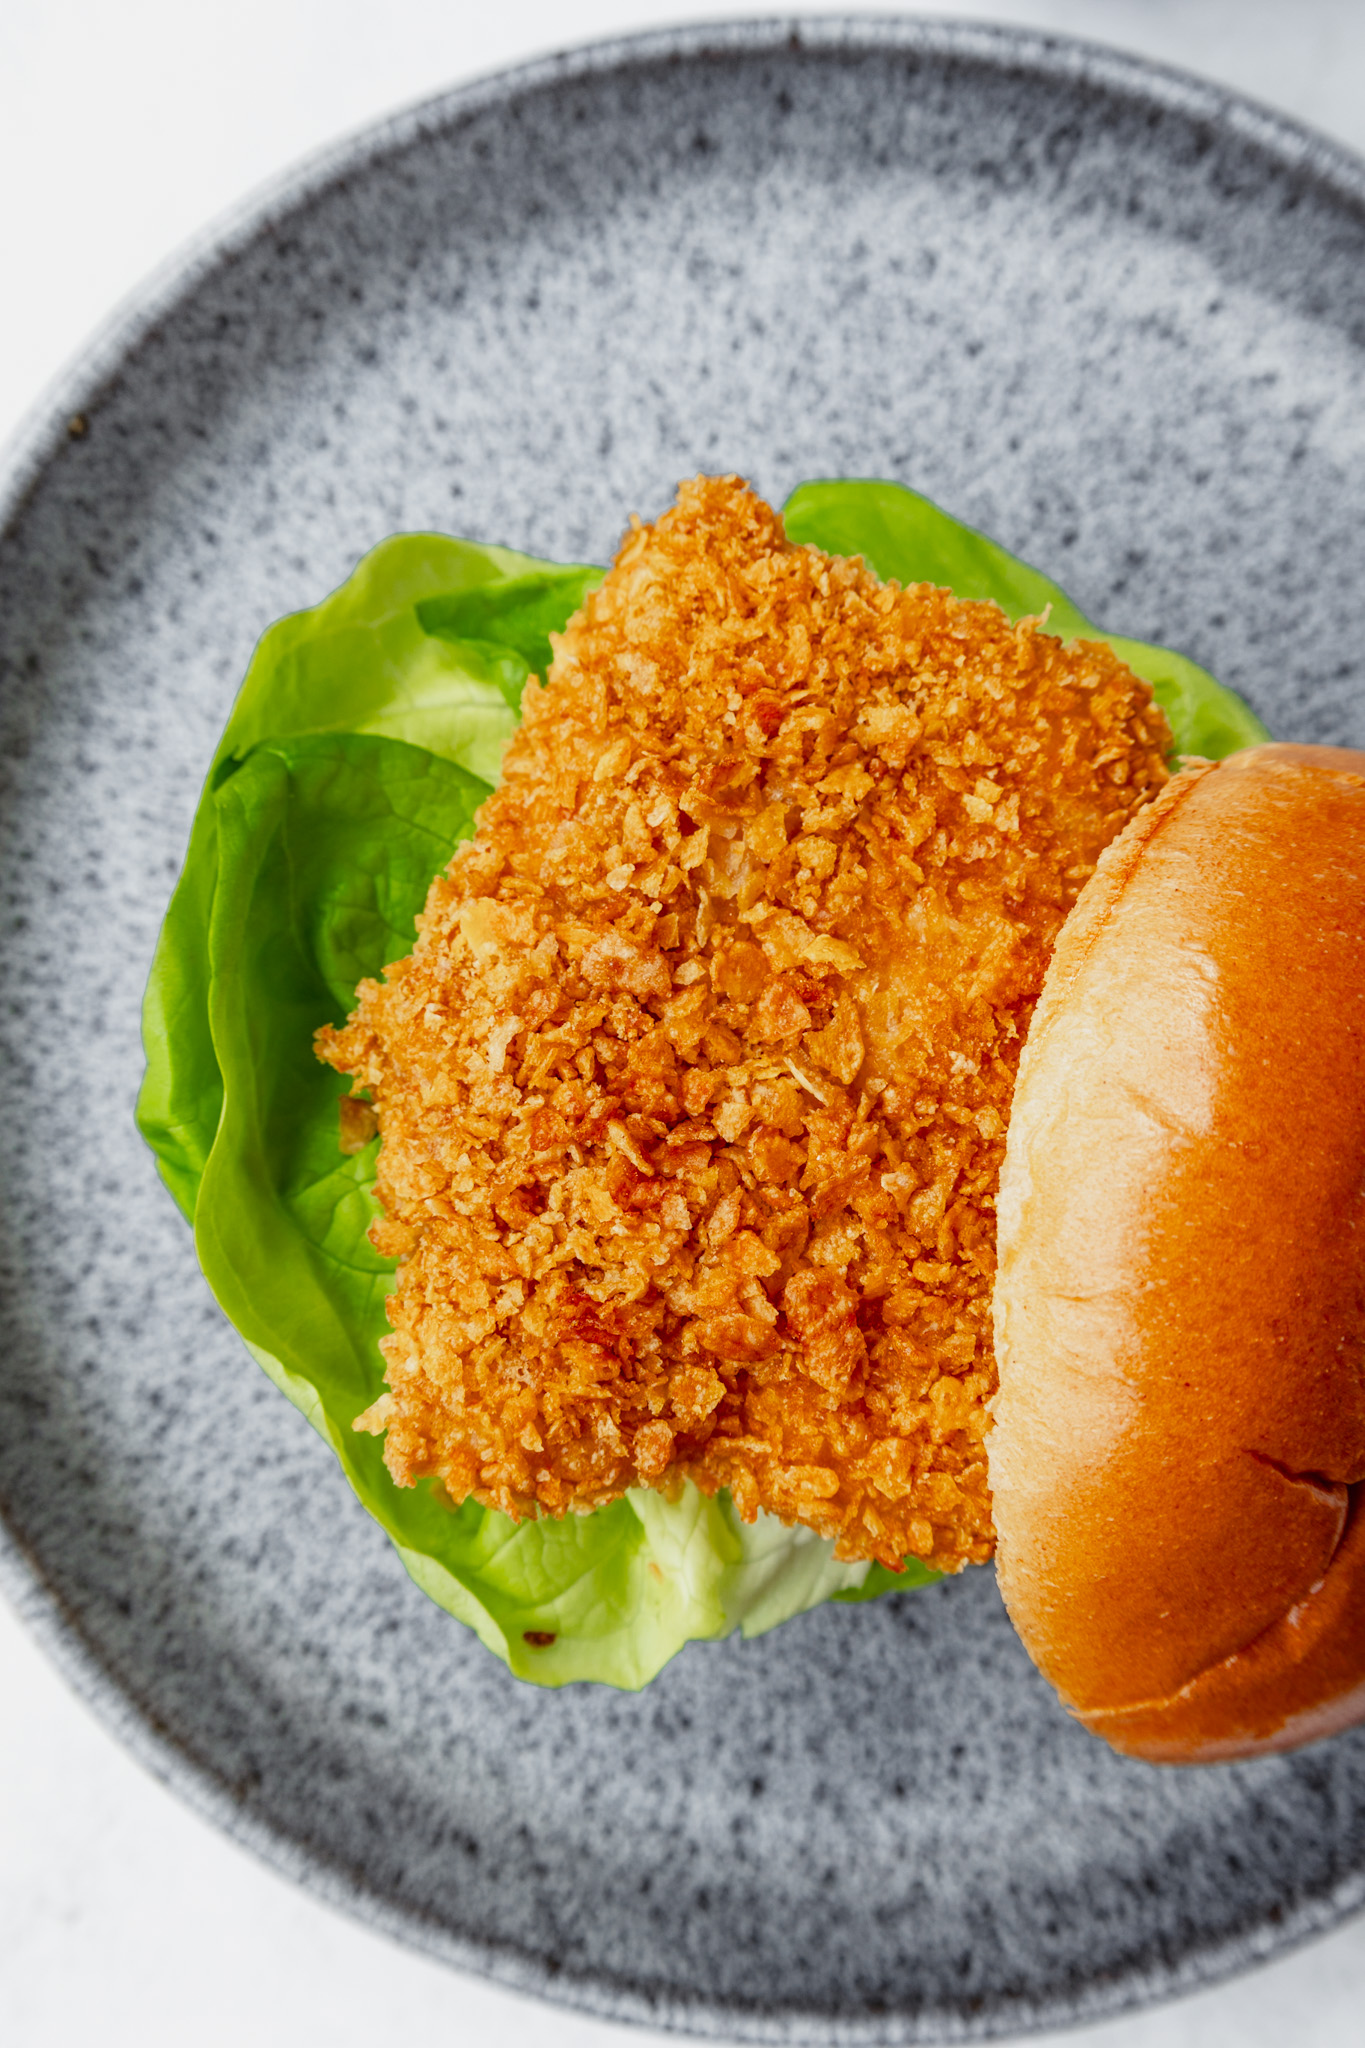 Cod Fillet Burger with Cornflake Crust - oven baked